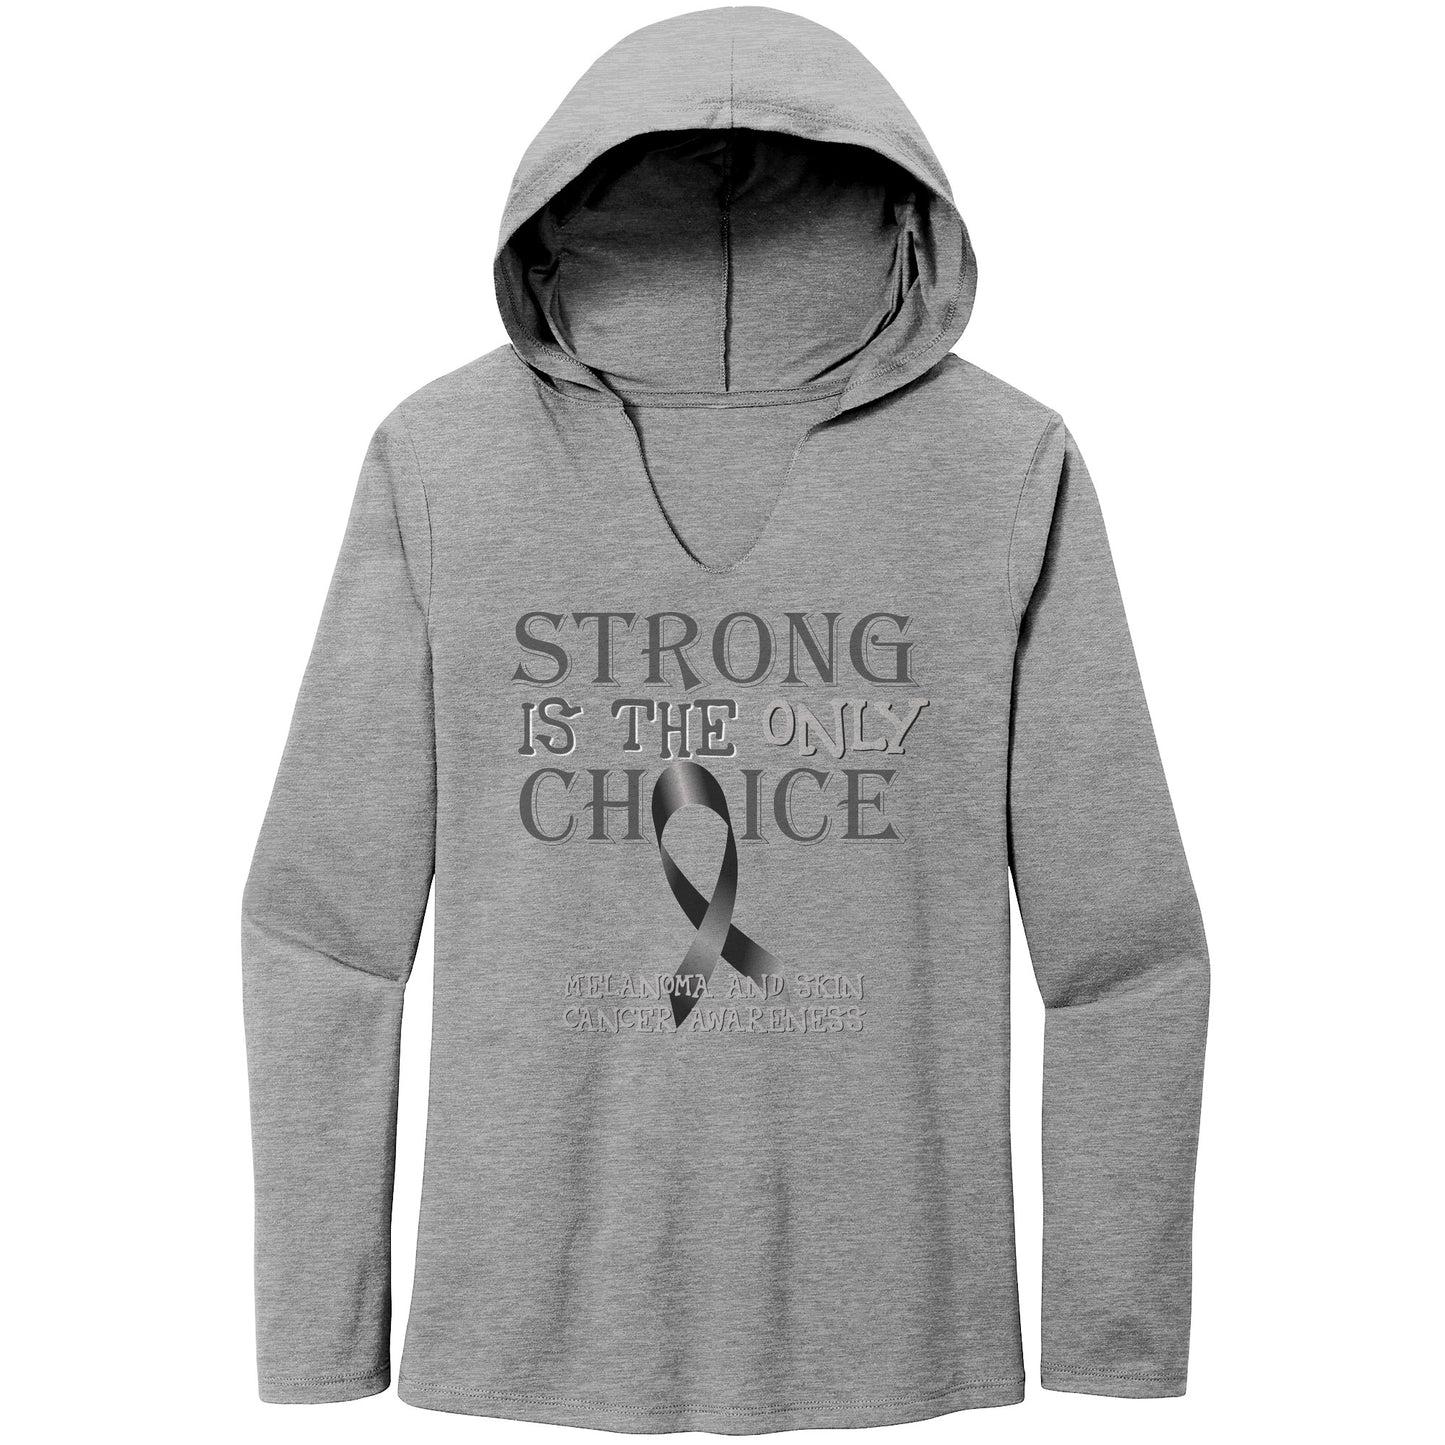 Strong is the Only Choice -Melanoma and Skin Cancer Awareness T-Shirt, Hoodie, Tank